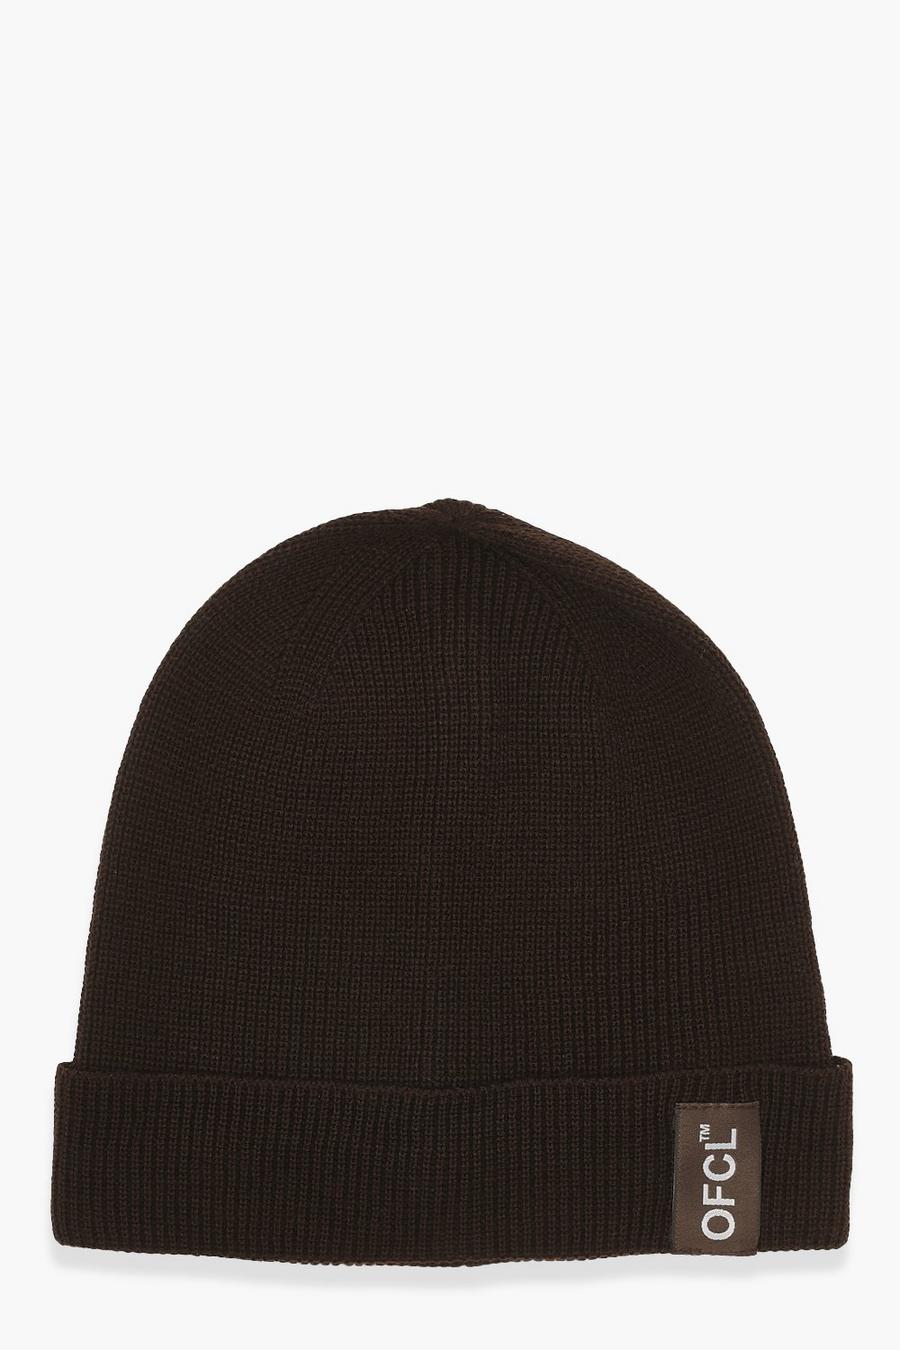 Chocolate Offcl Woven Tab Rib Beanie image number 1